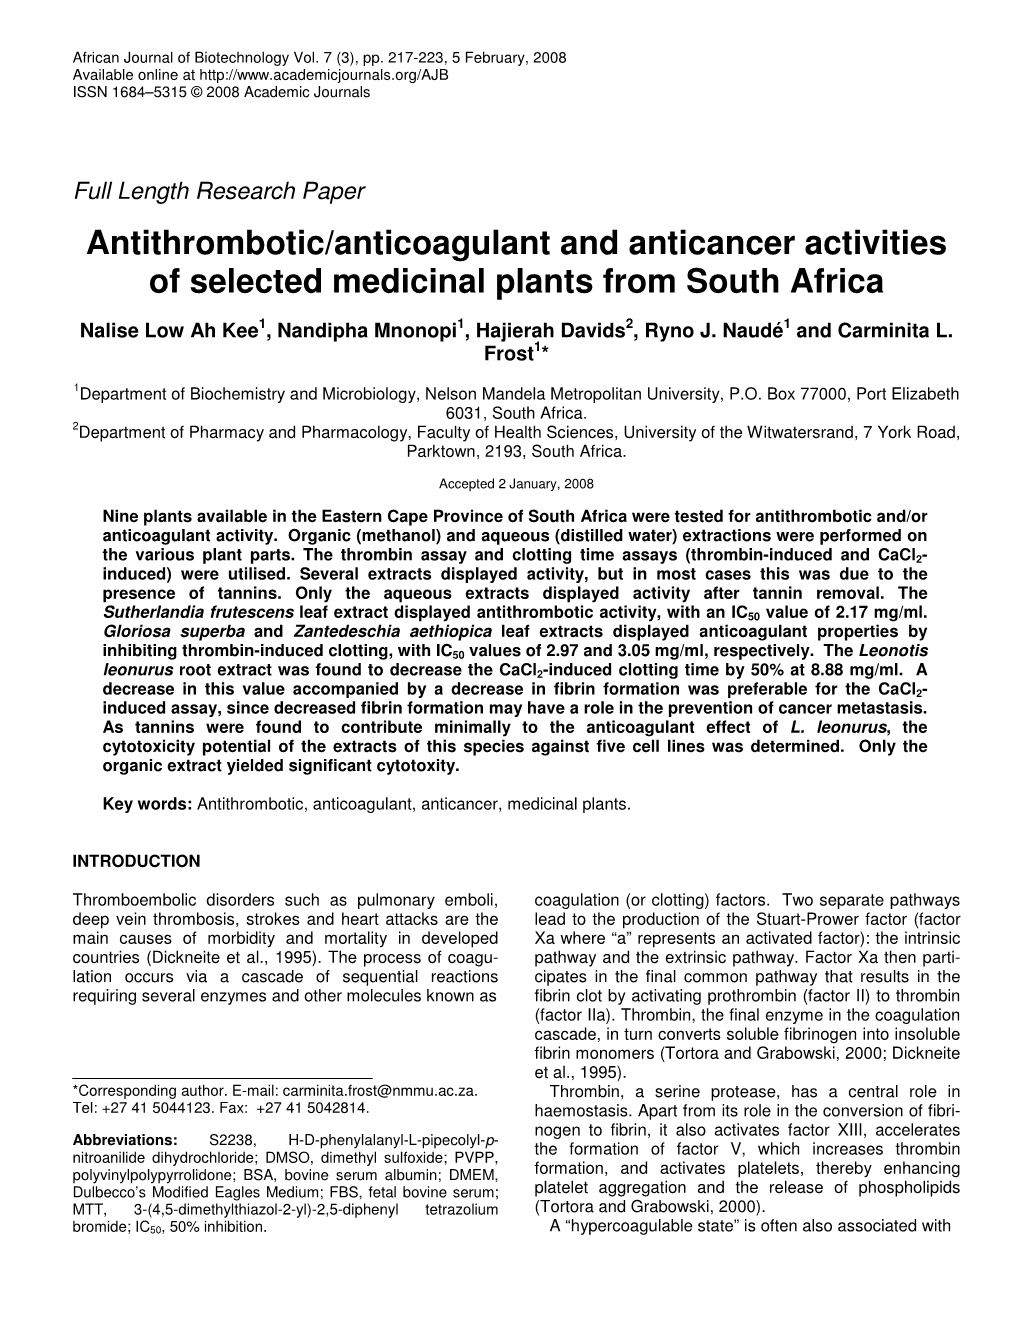 Antithrombotic/Anticoagulant and Anticancer Activities of Selected Medicinal Plants from South Africa